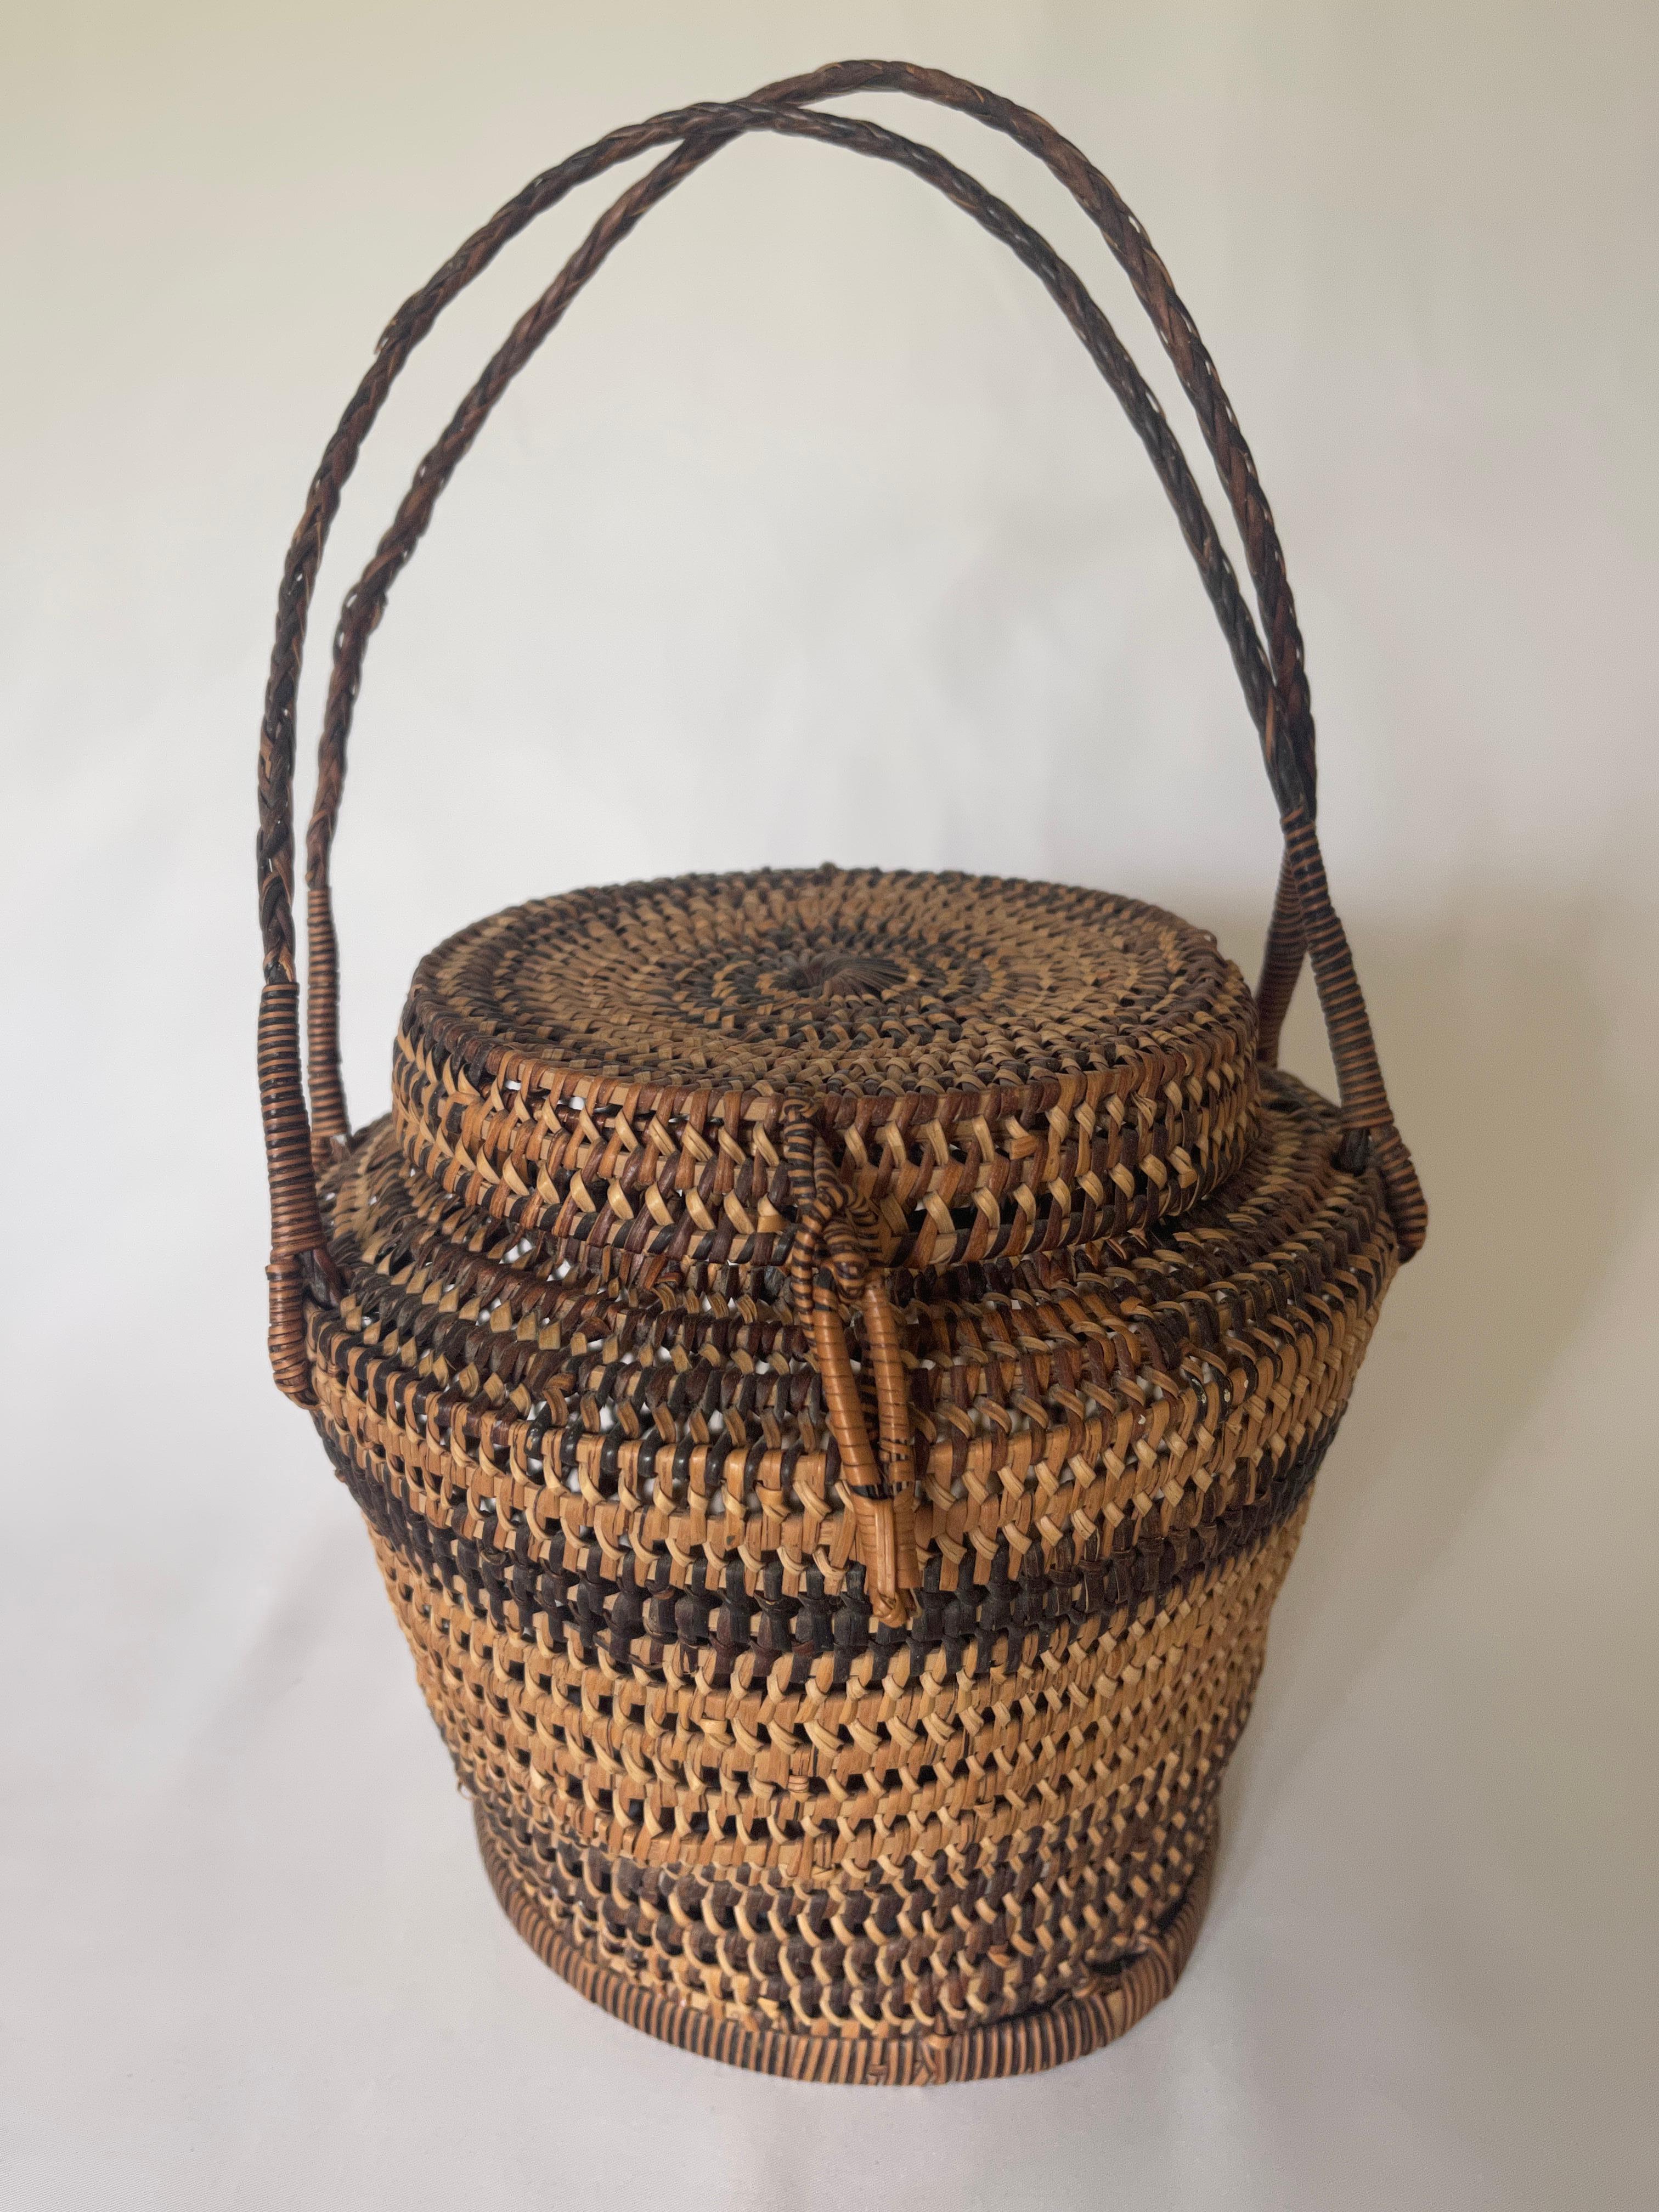 1930's hand woven circular fish basket purse with double drop handles to carry in hand or under arm.
The bag can also be used to enhance home decor and as a catch all. Beautiful piece.